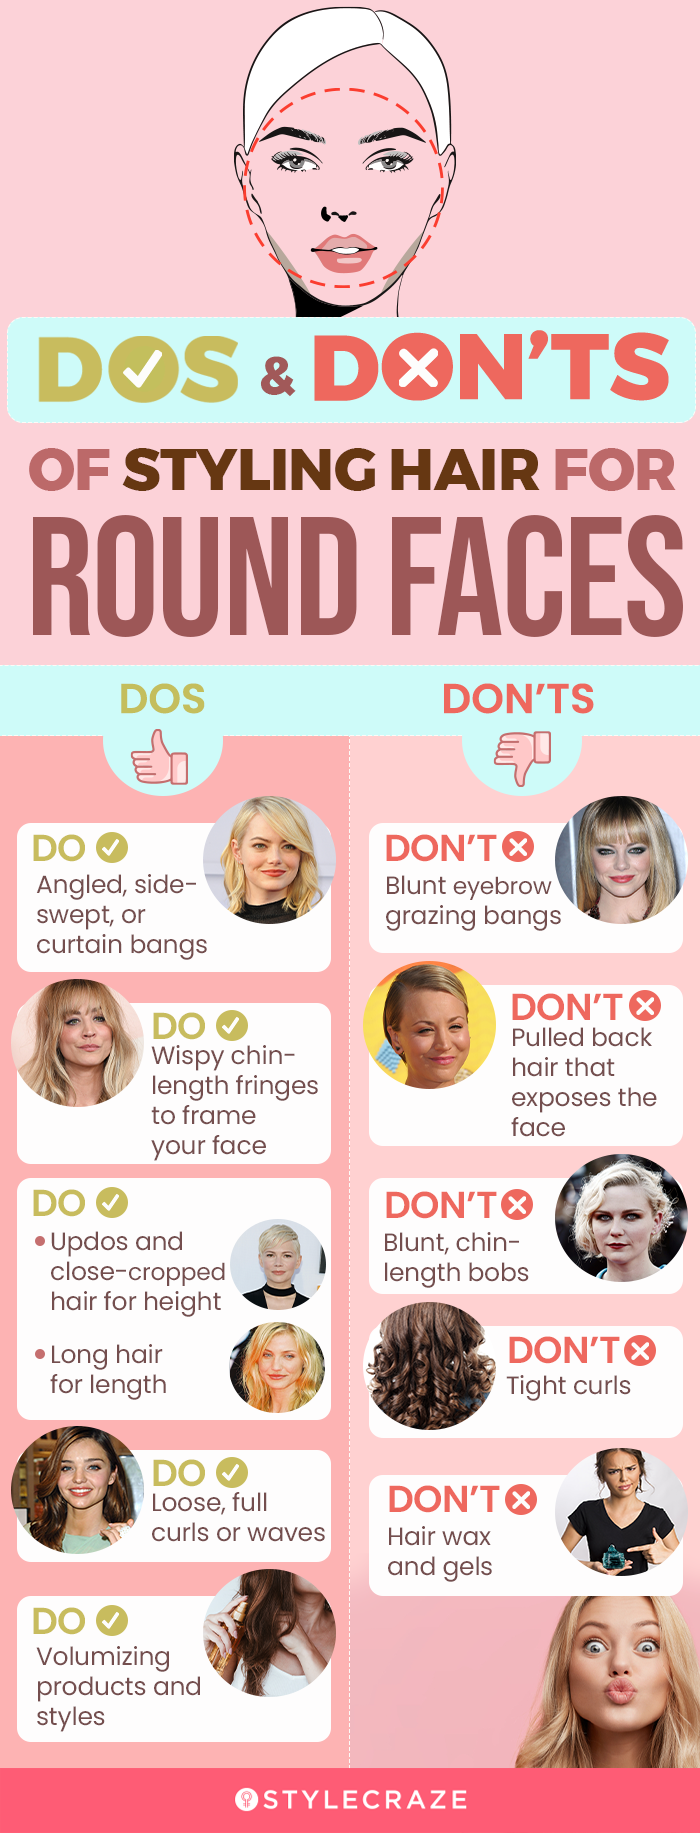 Hairstyles for Chubby Faces: 28 Slimming Haircuts and Tutorials